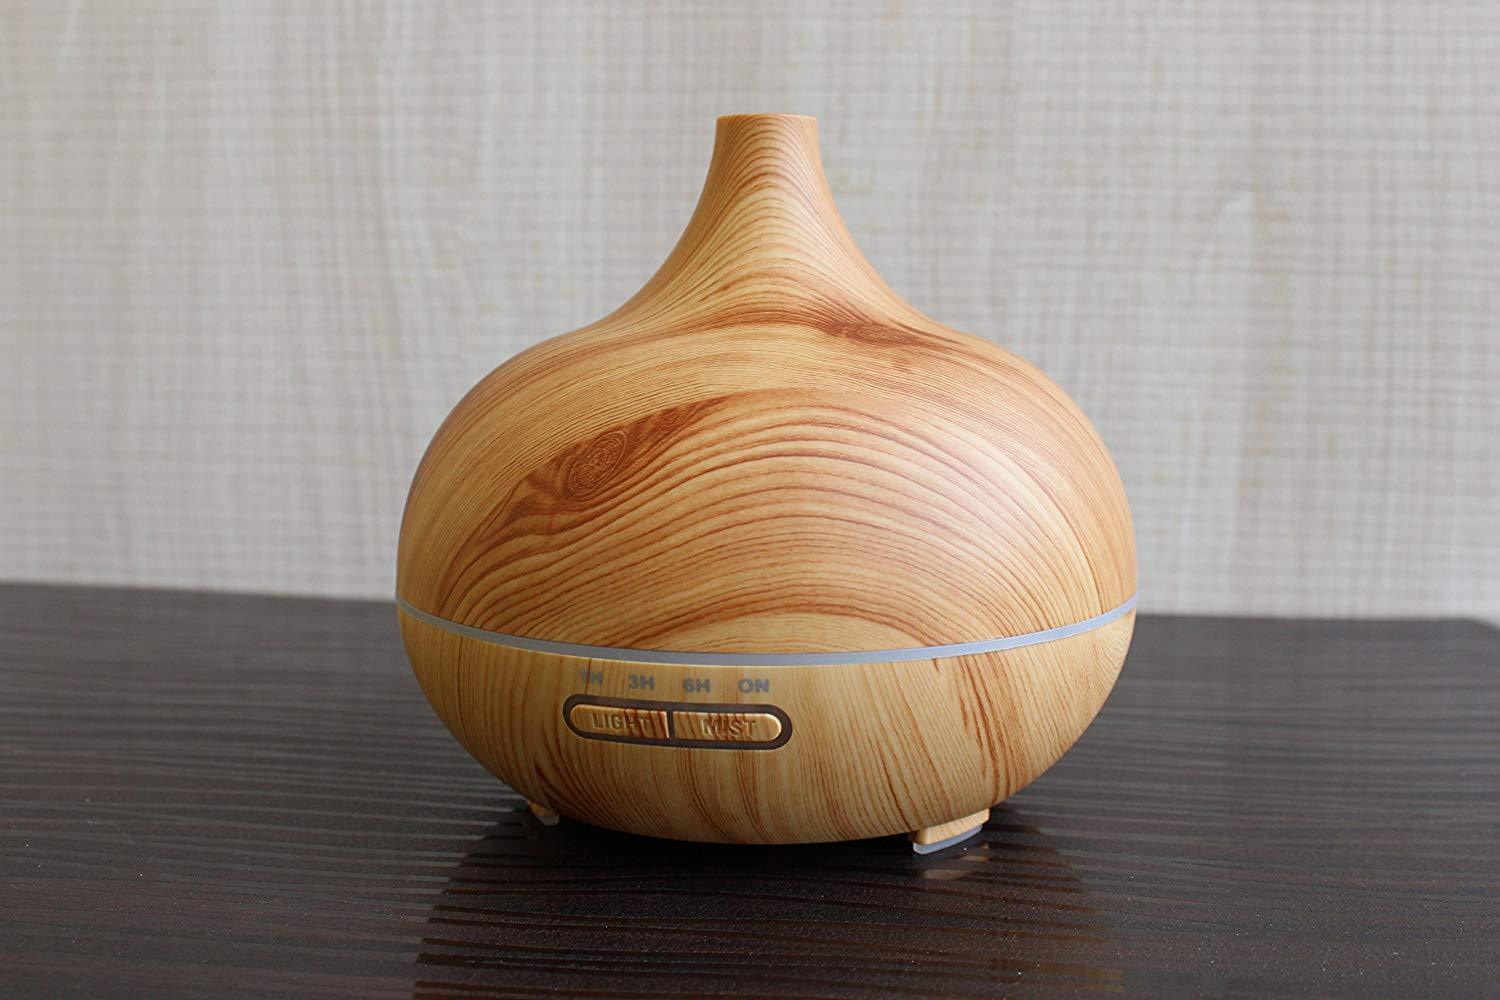 FunkyTradition 300ml Ultrasonic Essential Oil Aroma Diffuser, Bamboo Finish, BPA Free, Cool Mist Humidifier for Office Home Bedroom Living Room Study Yoga Spa - FunkyTradition